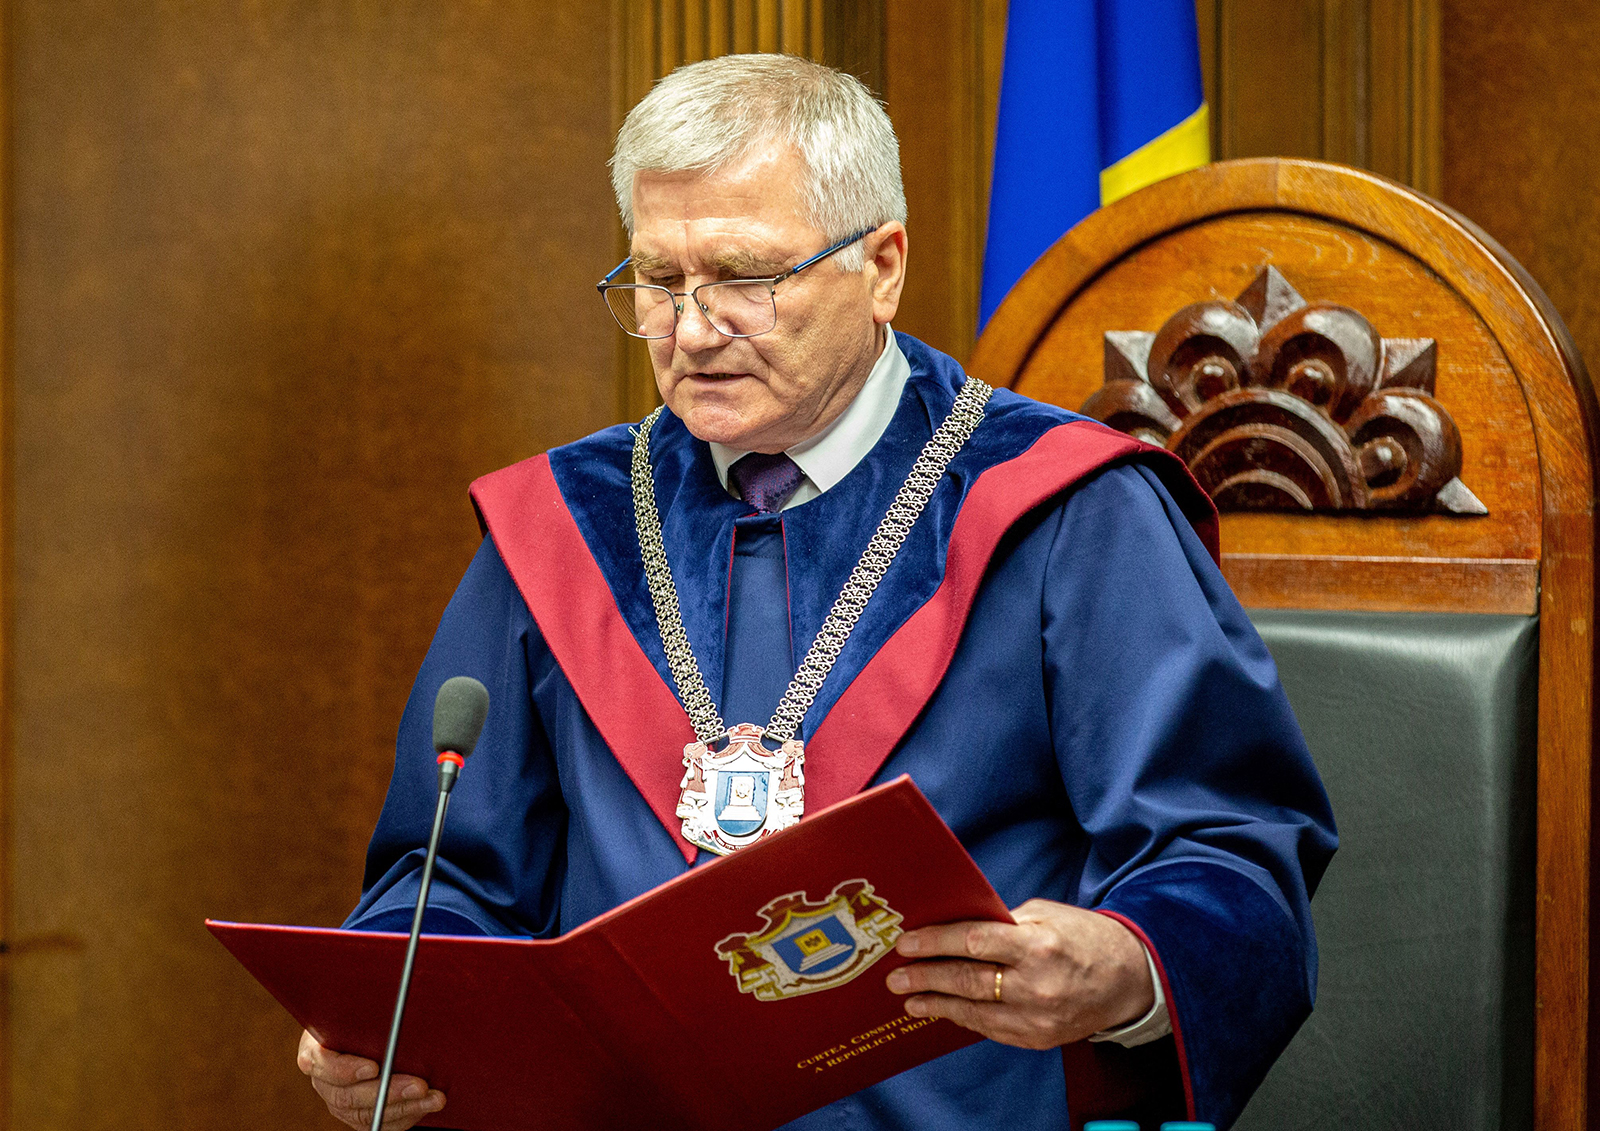 President of The Constitutional Court of Moldova, Judge Nicolae Rosca, reads the decision of the Court to outlaw the opposition "Shor" party of fugitive pro-Russian oligarch Ilan Shor, in Chisinau, on June 19.